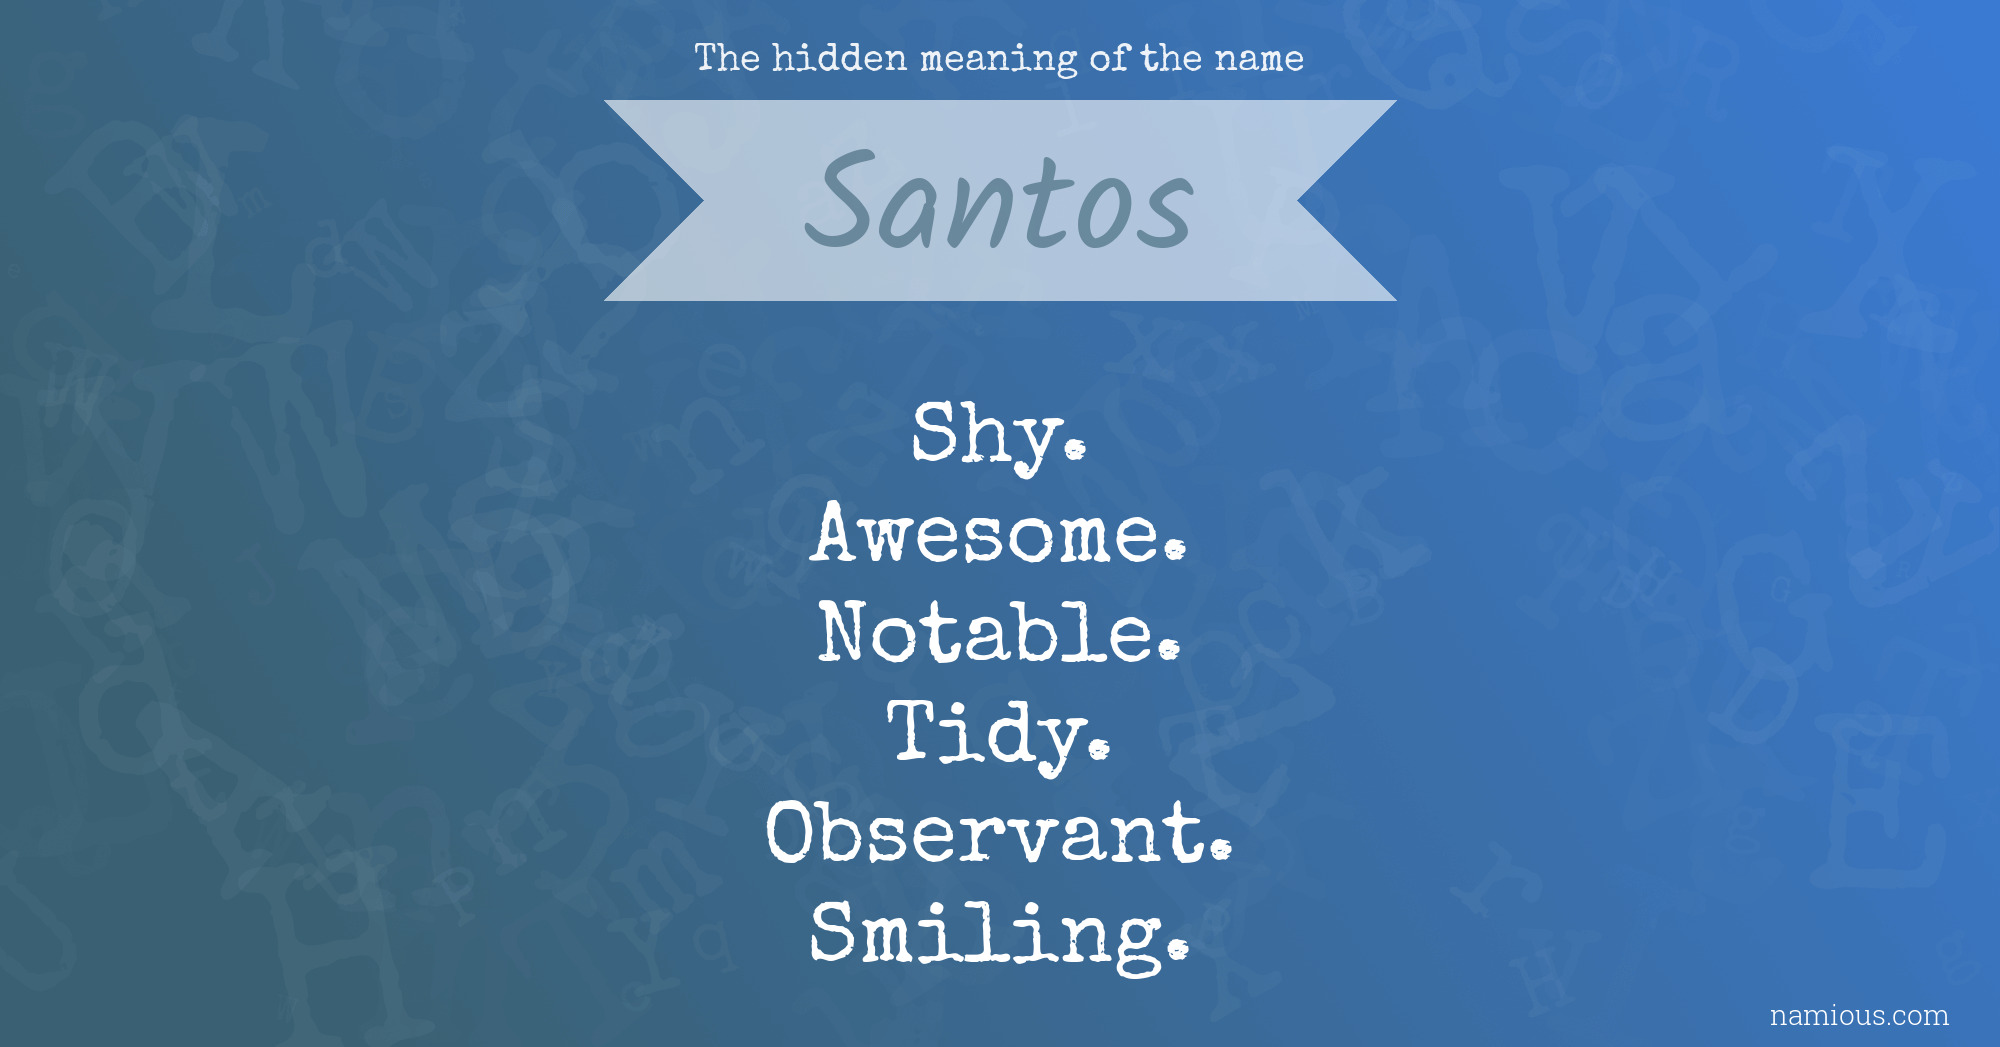 The hidden meaning of the name Santos